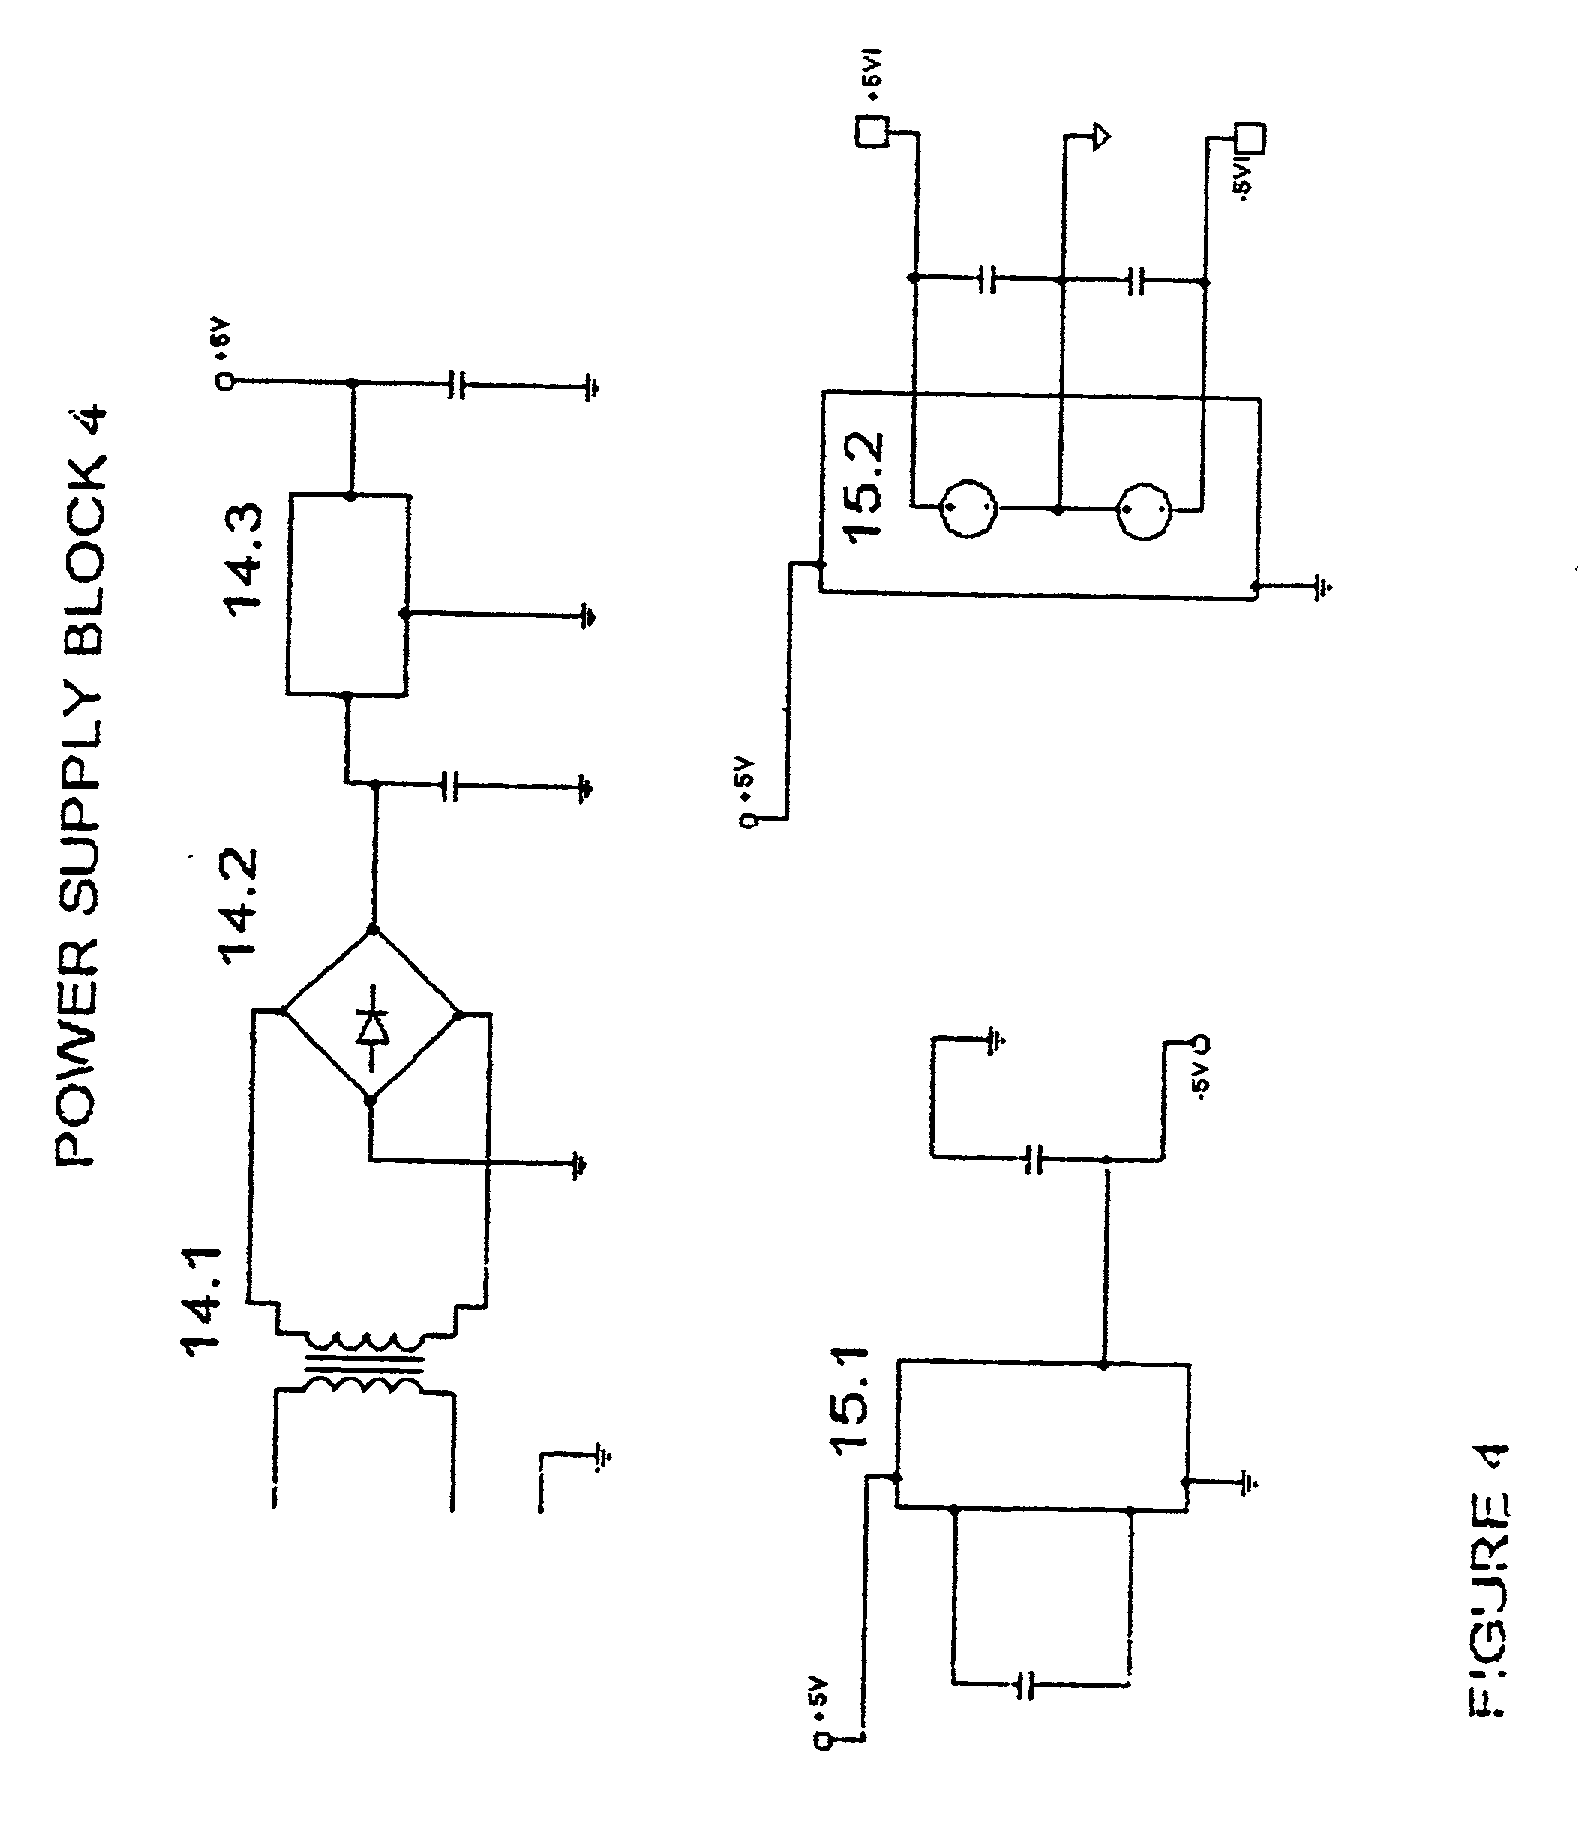 Apparatus for evaluation of skin impedance variations